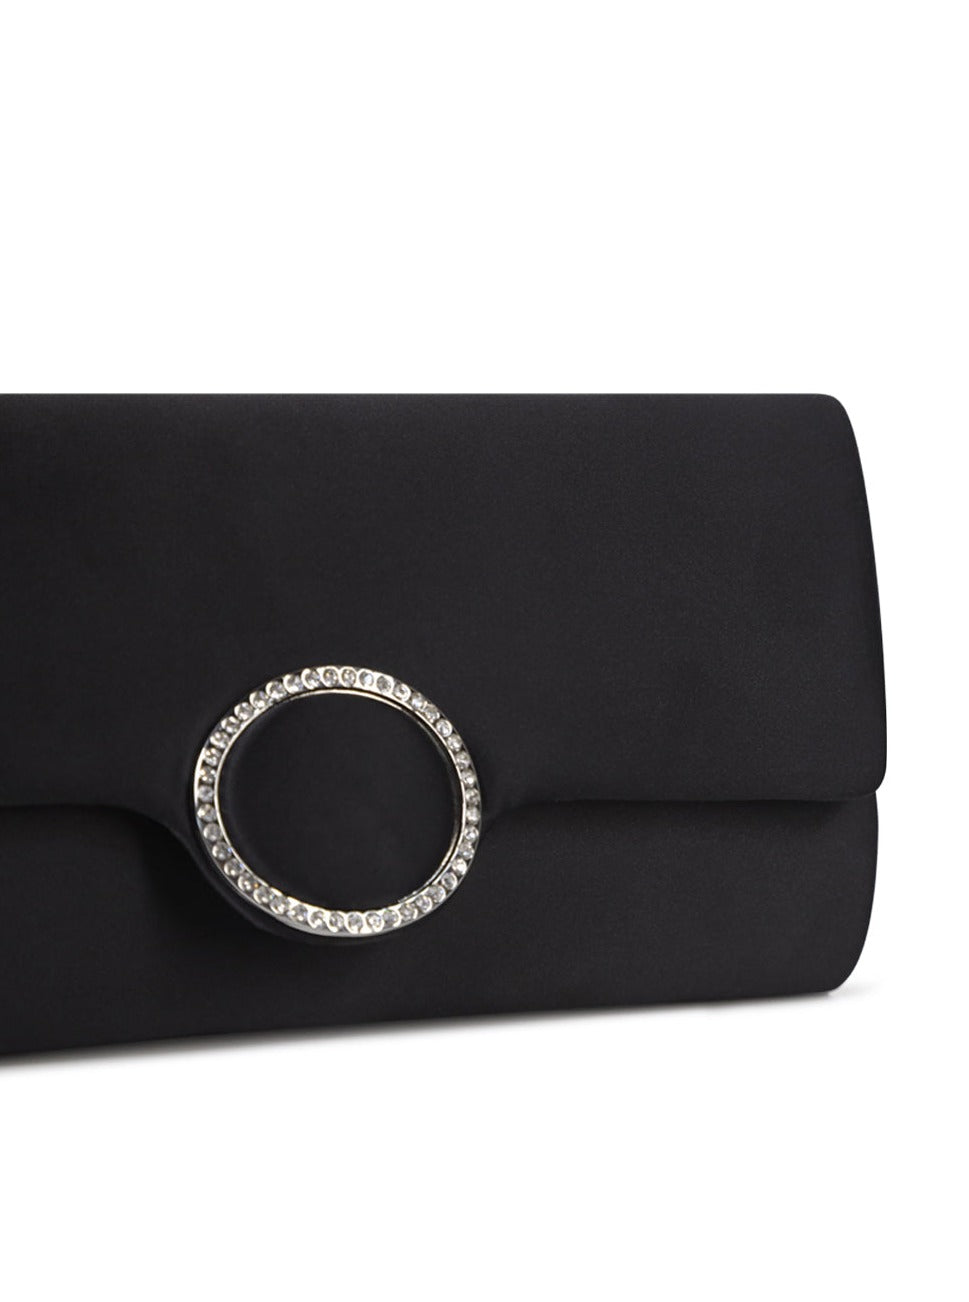 Satin Clutch with Diamante in Black | Occasion | Bag | Wedding guest | Wedding | Races | Clutch Bag | Women's Accessories | Women | Date Night | Cocktails | Evening Accessories | Evening Bag